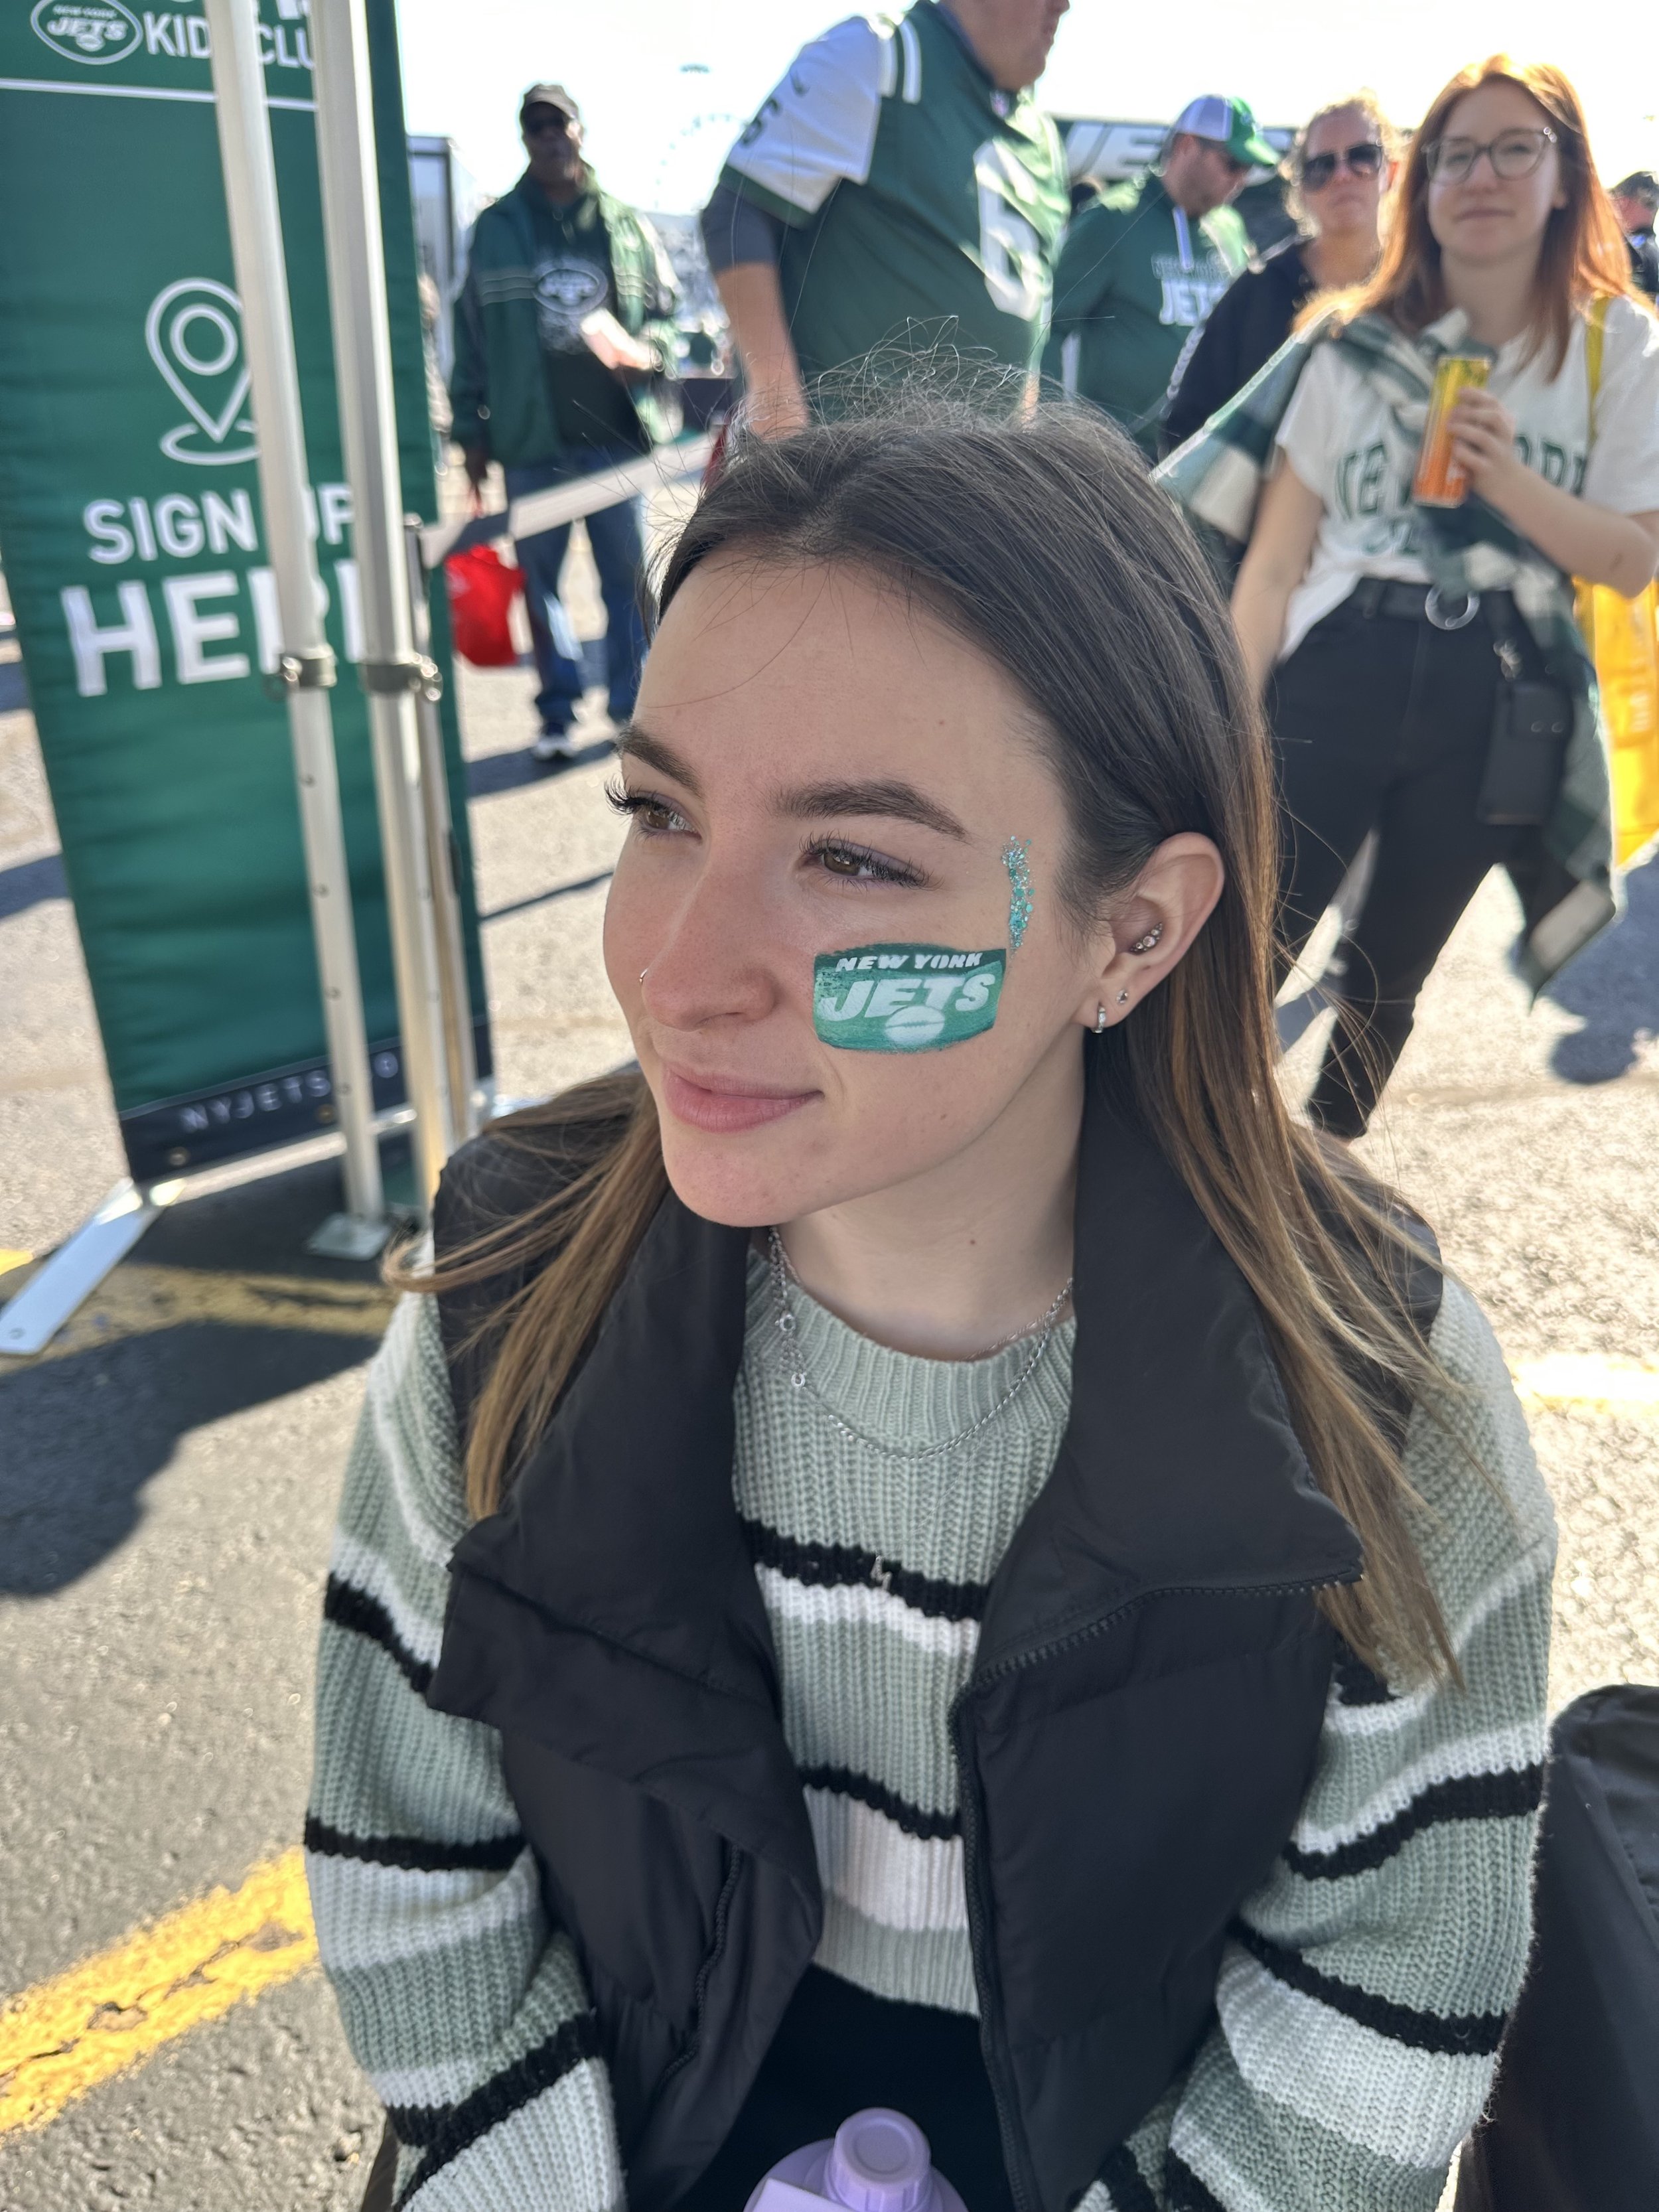 New York Jets Face Painting Near Rutherford New Jersey.jpg